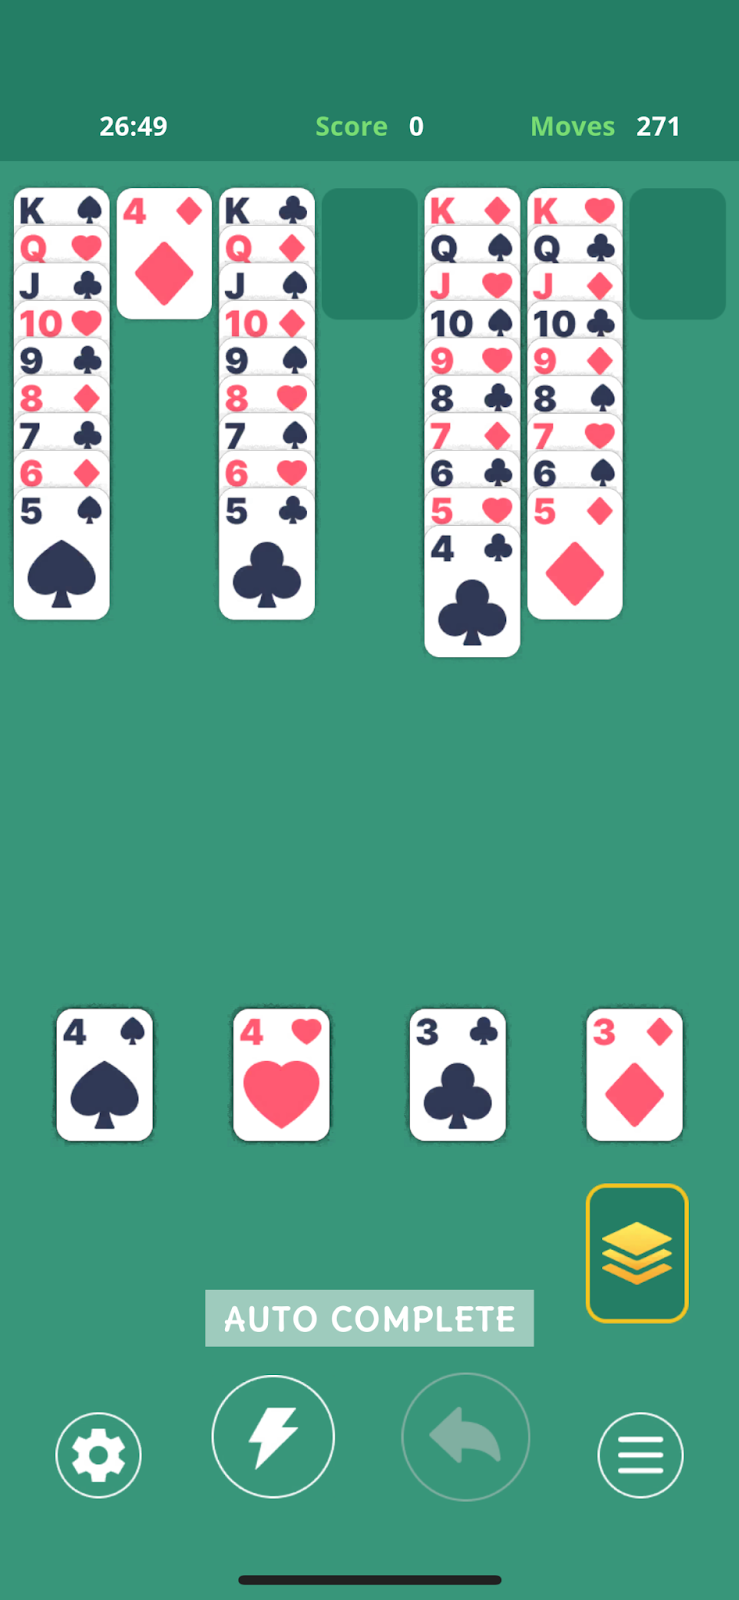 What You Should Know About Solitaire Card Games